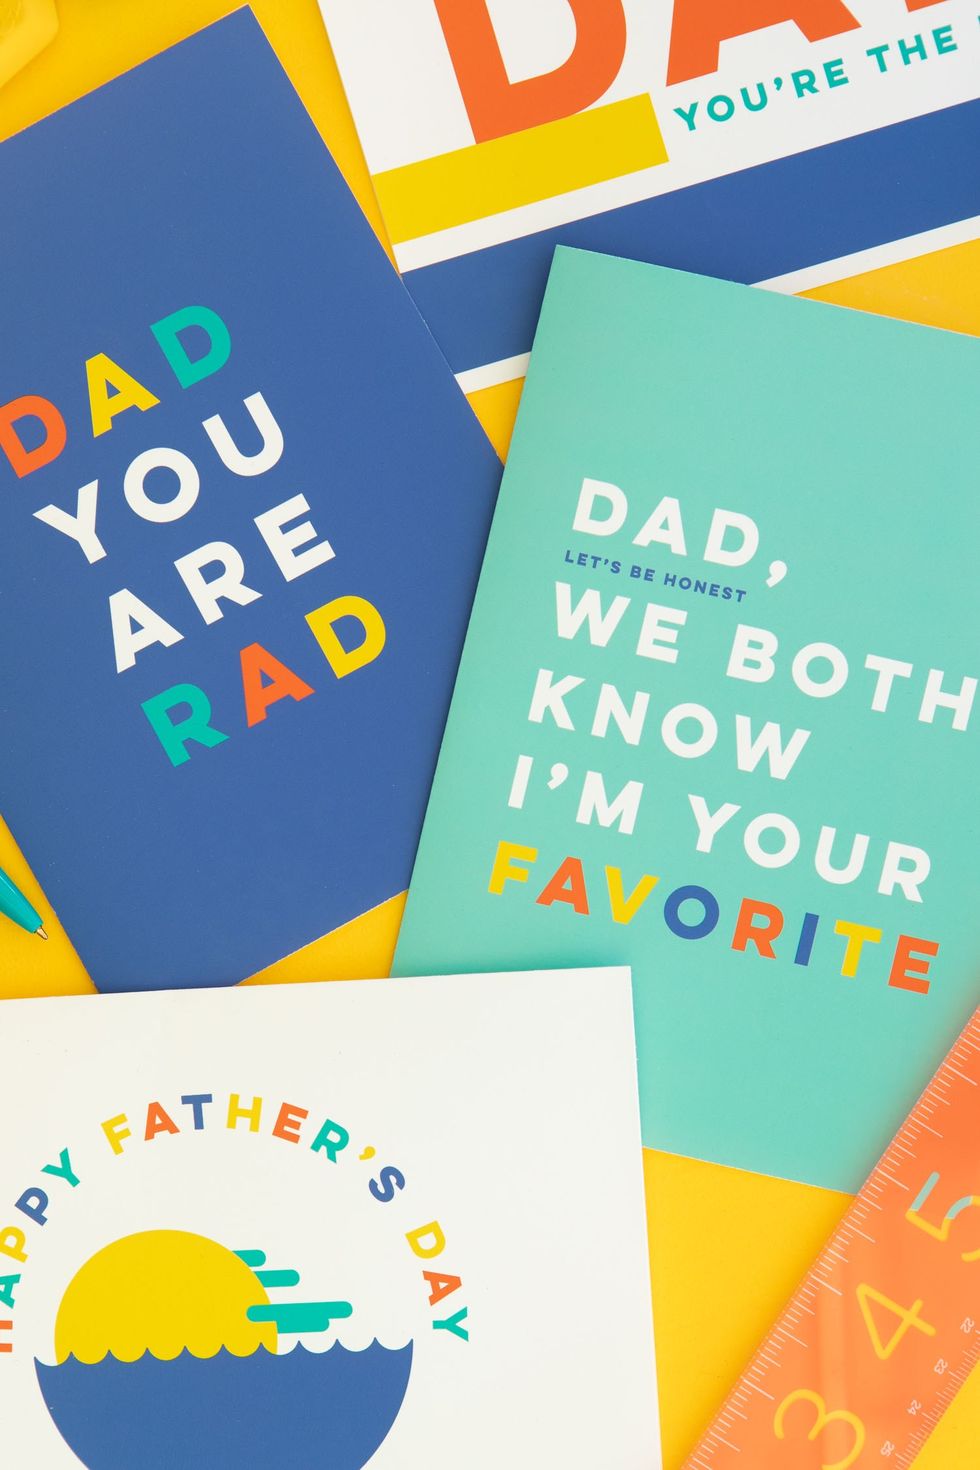 37 Printable Father #39 s Day Cards Cute Father #39 s Day Cards